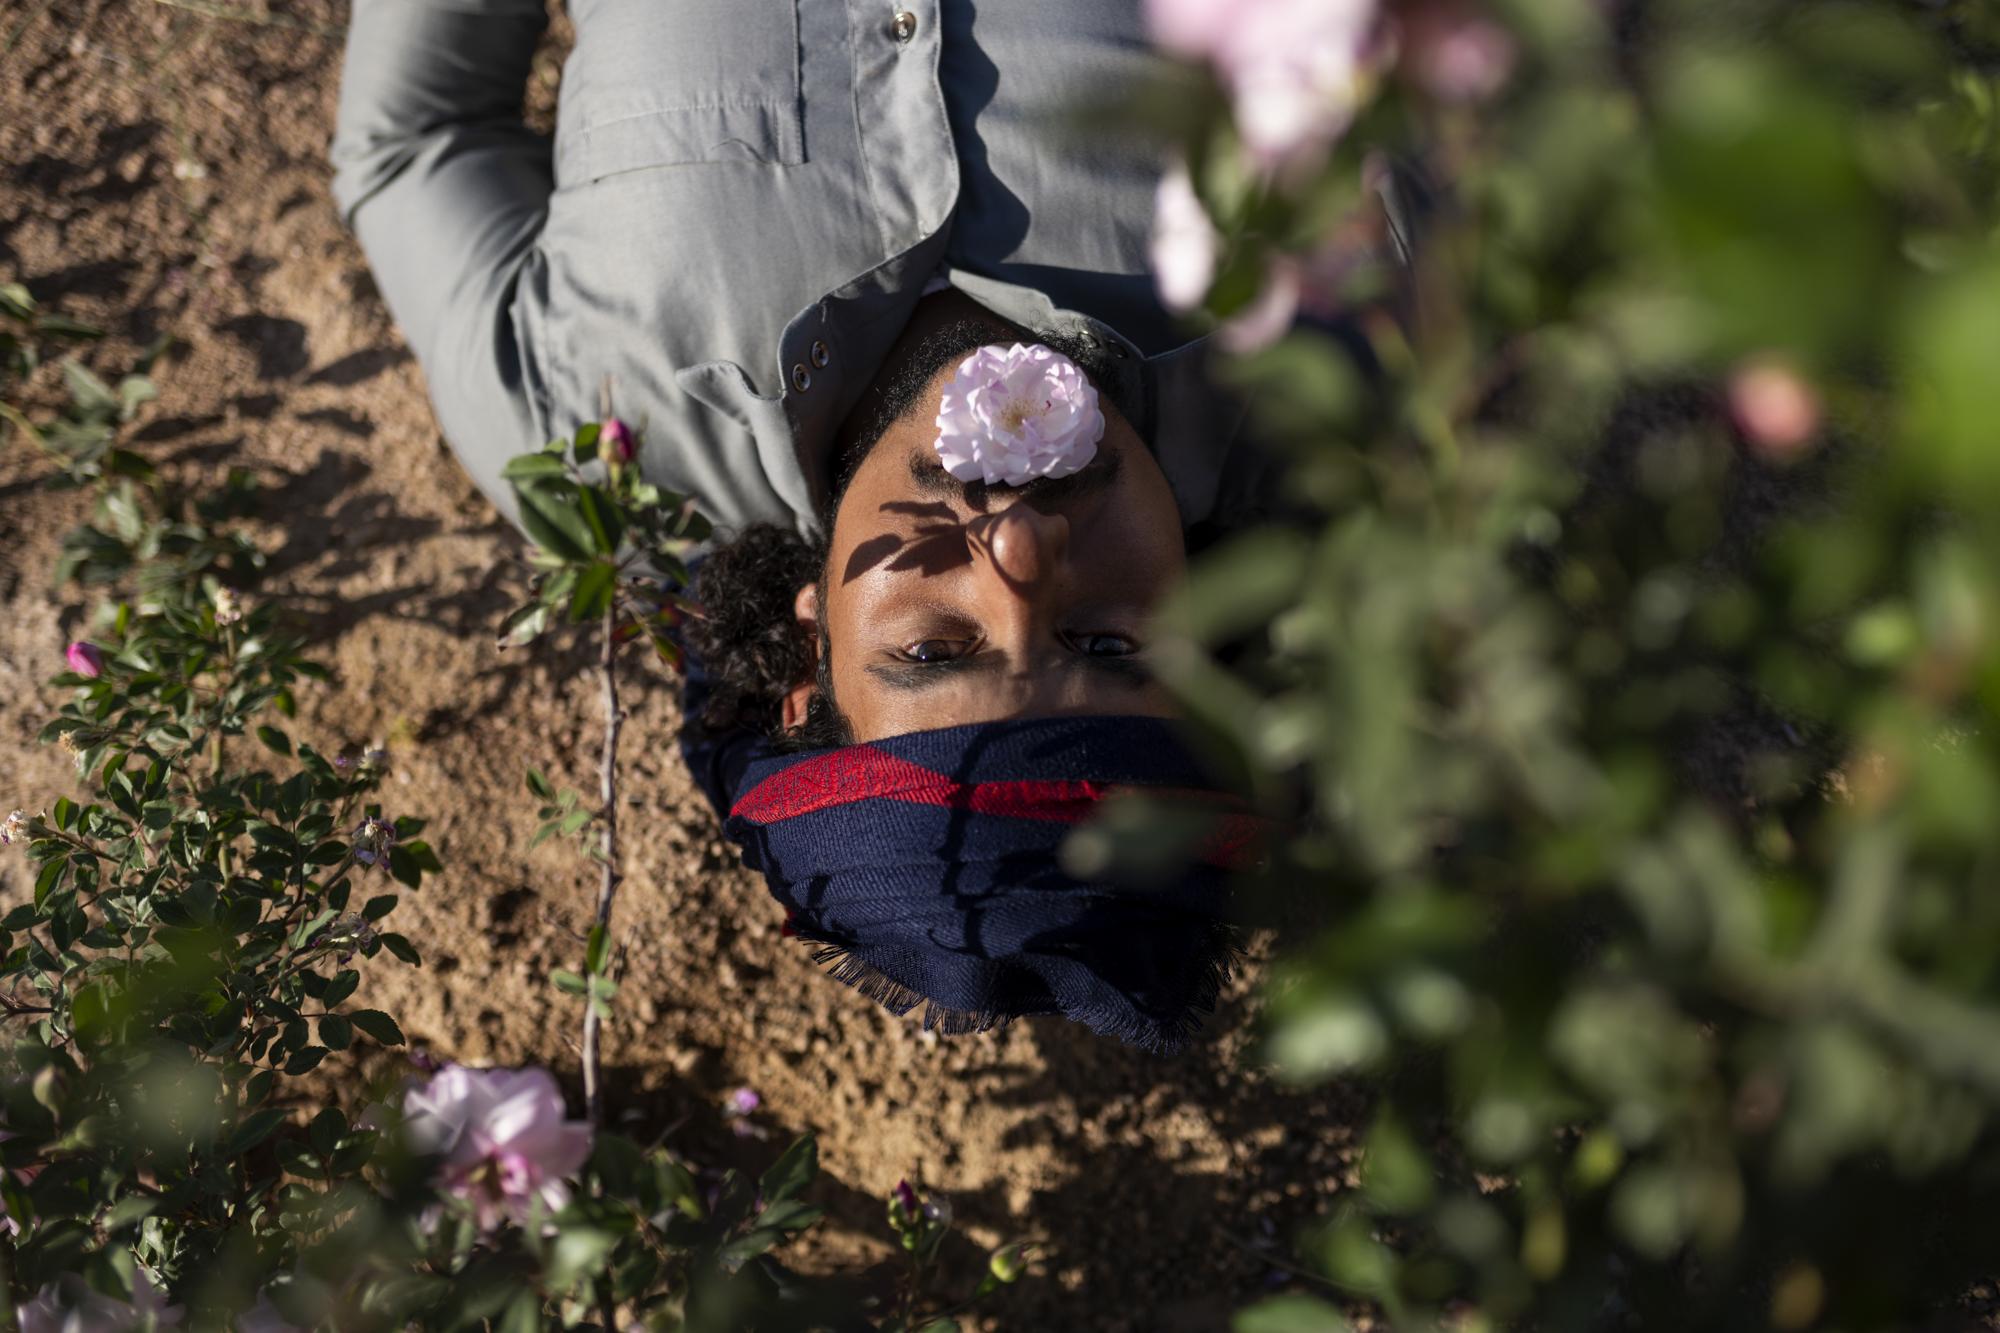 On National Geographic: In one of Egypt's most spiritual places, Bedouins find peace and resilience - Moussa Algebaly, a member of the Jebeliya tribe, lies under a flower plant after working on his...